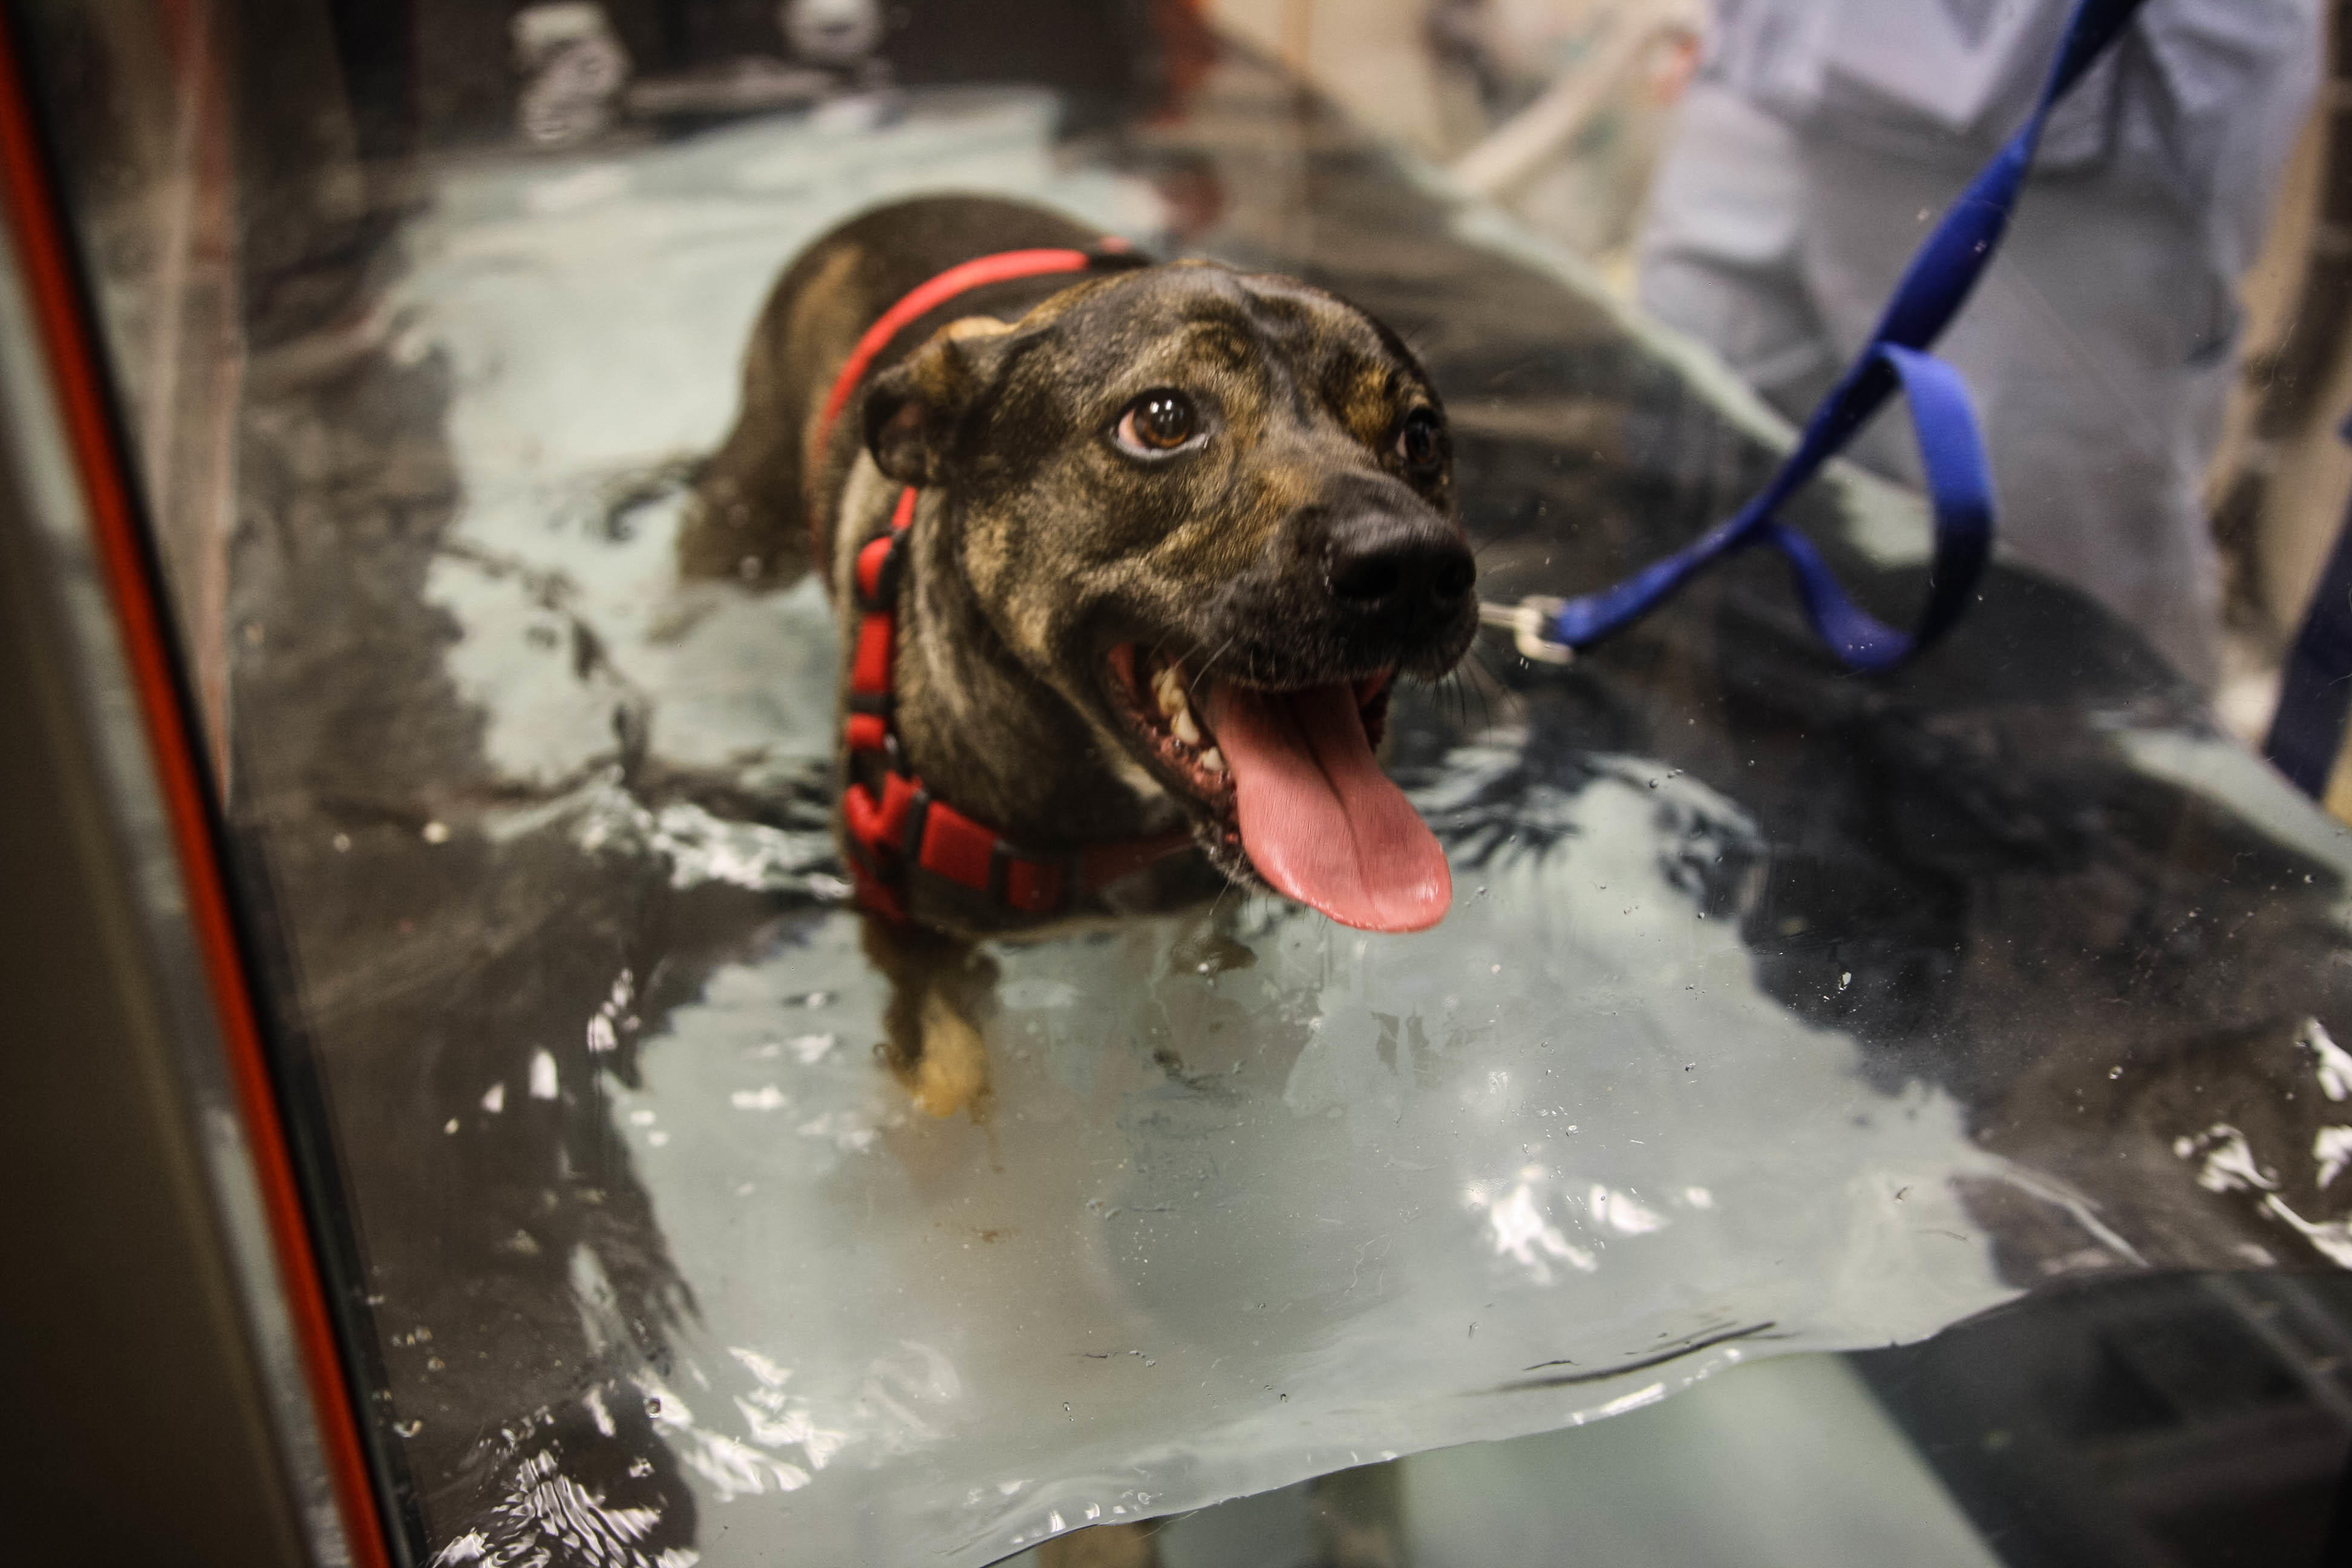 The underwater treadmill relies on the therapeutic effects to provide physical rehabilitation, weigh Calusa Veterinary Center Boca Raton (561)999-3000